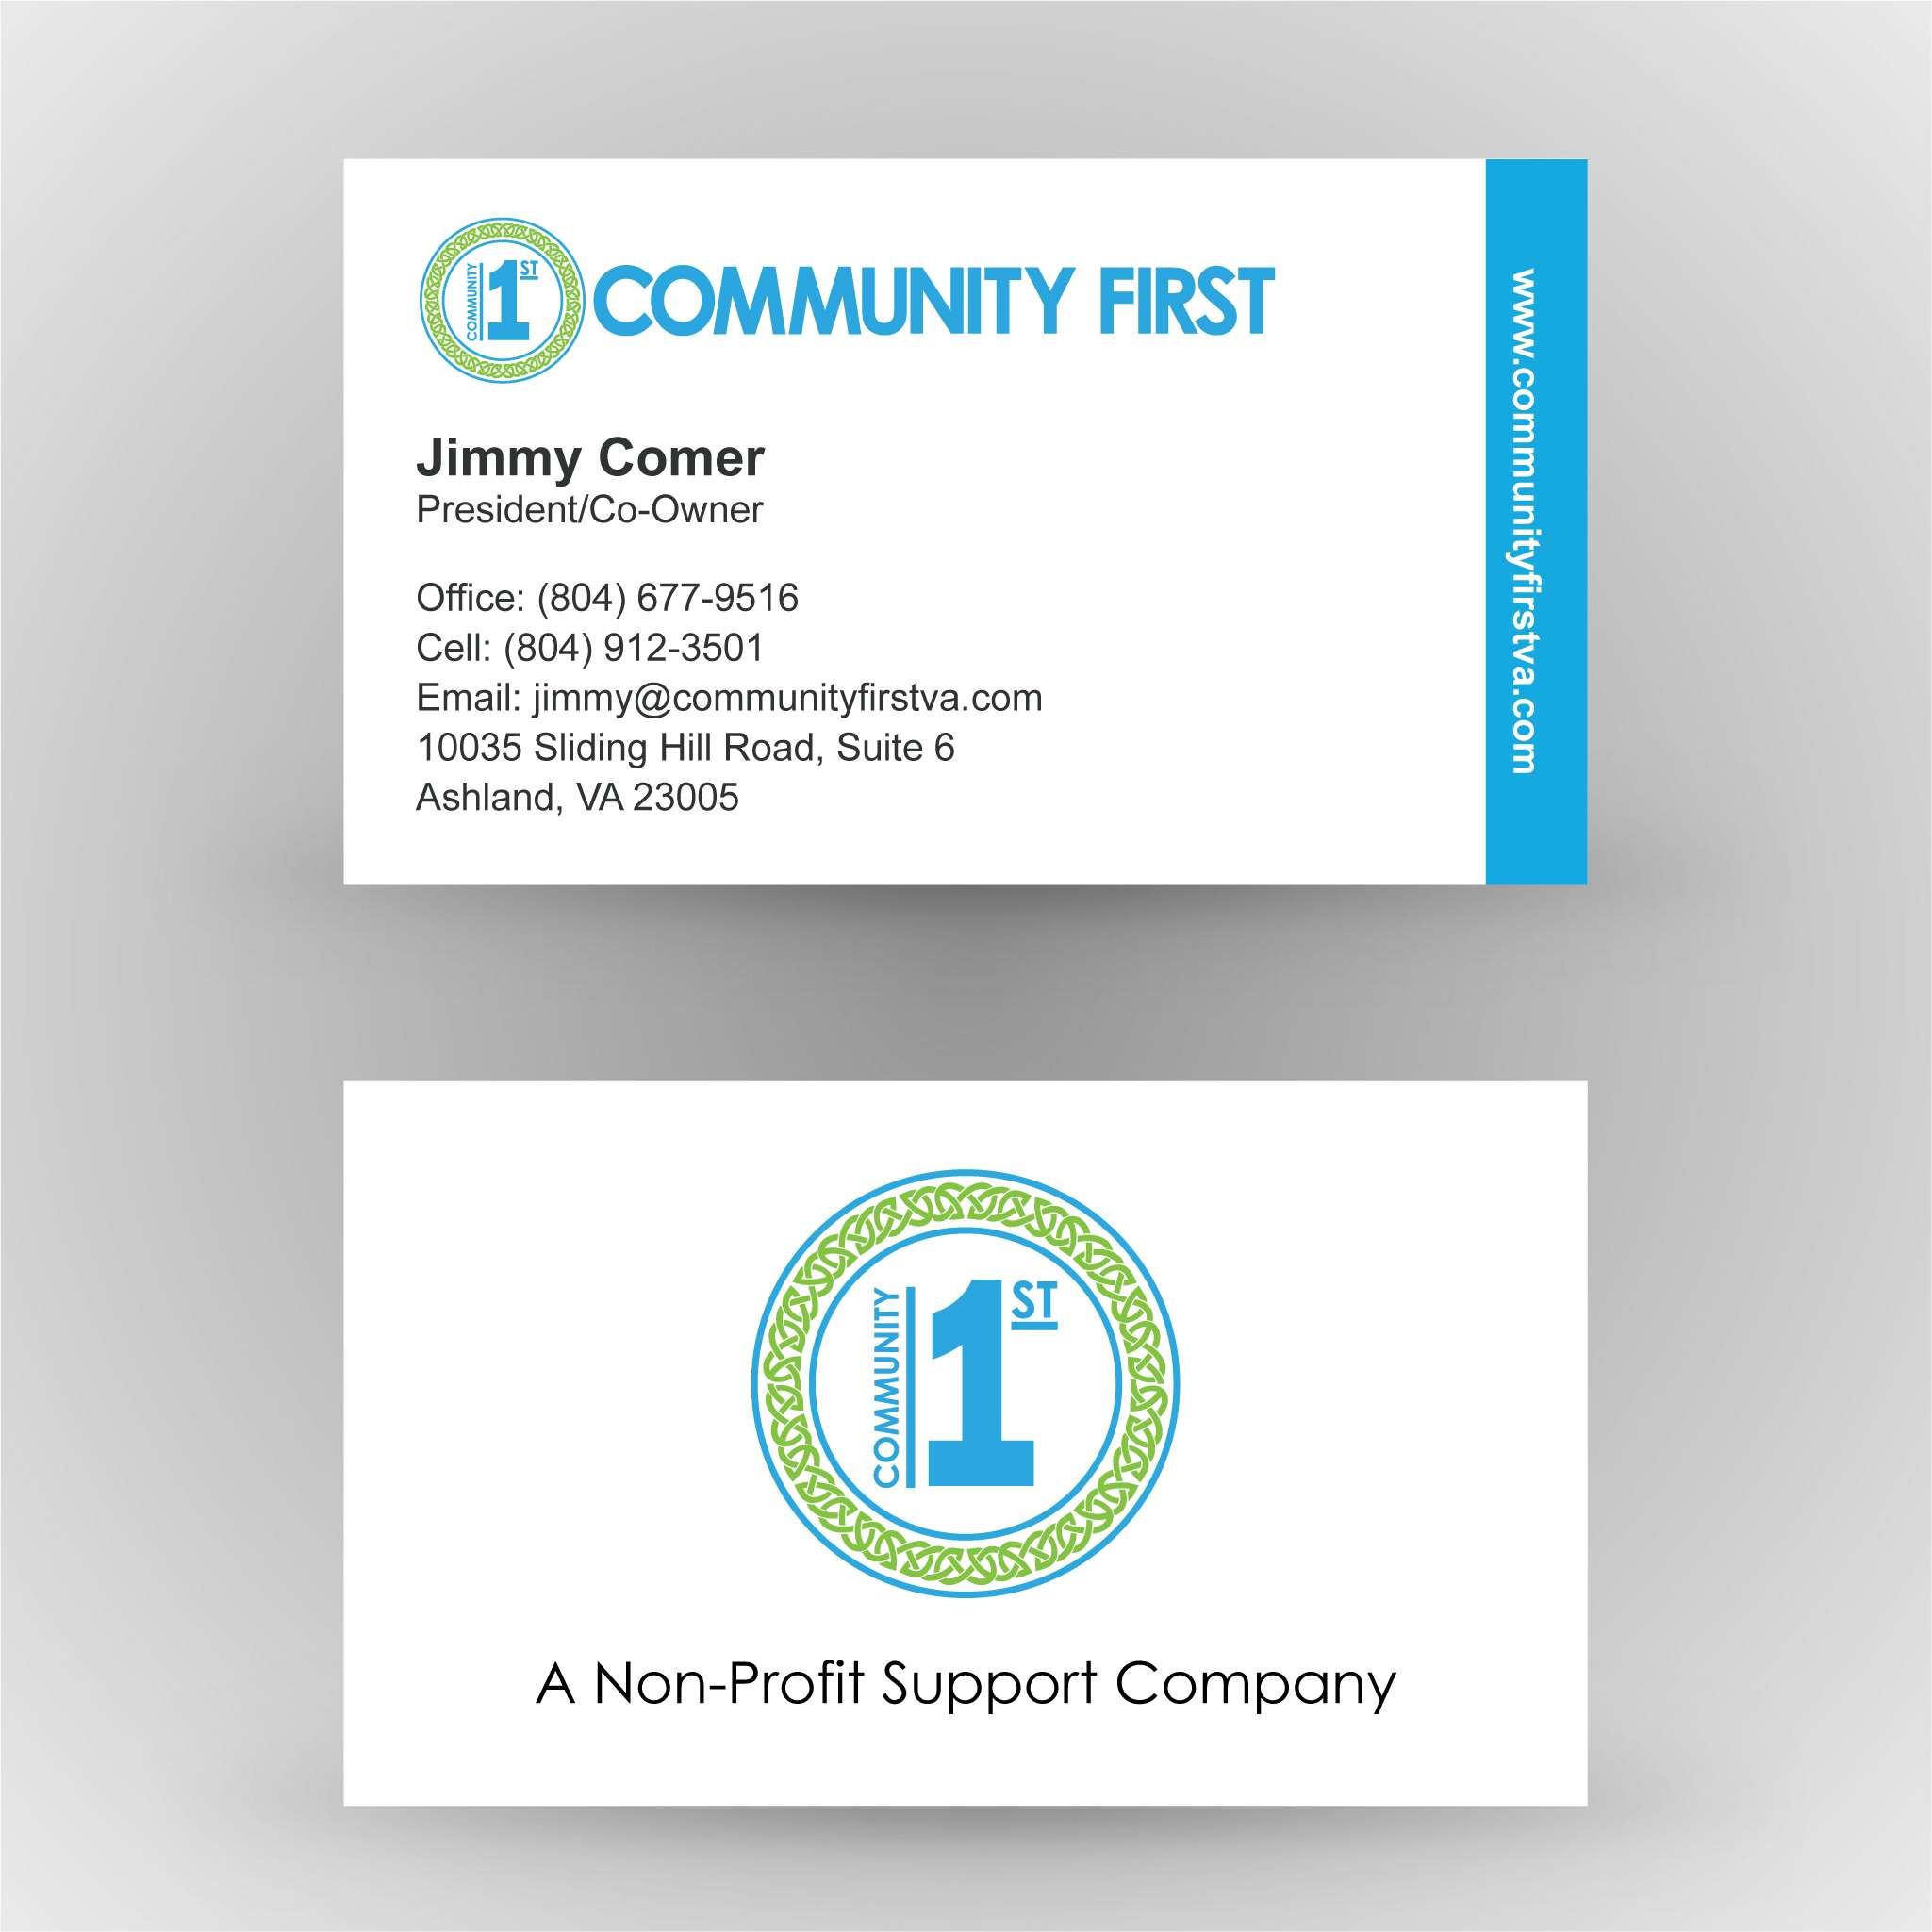 Community First - Business Cards